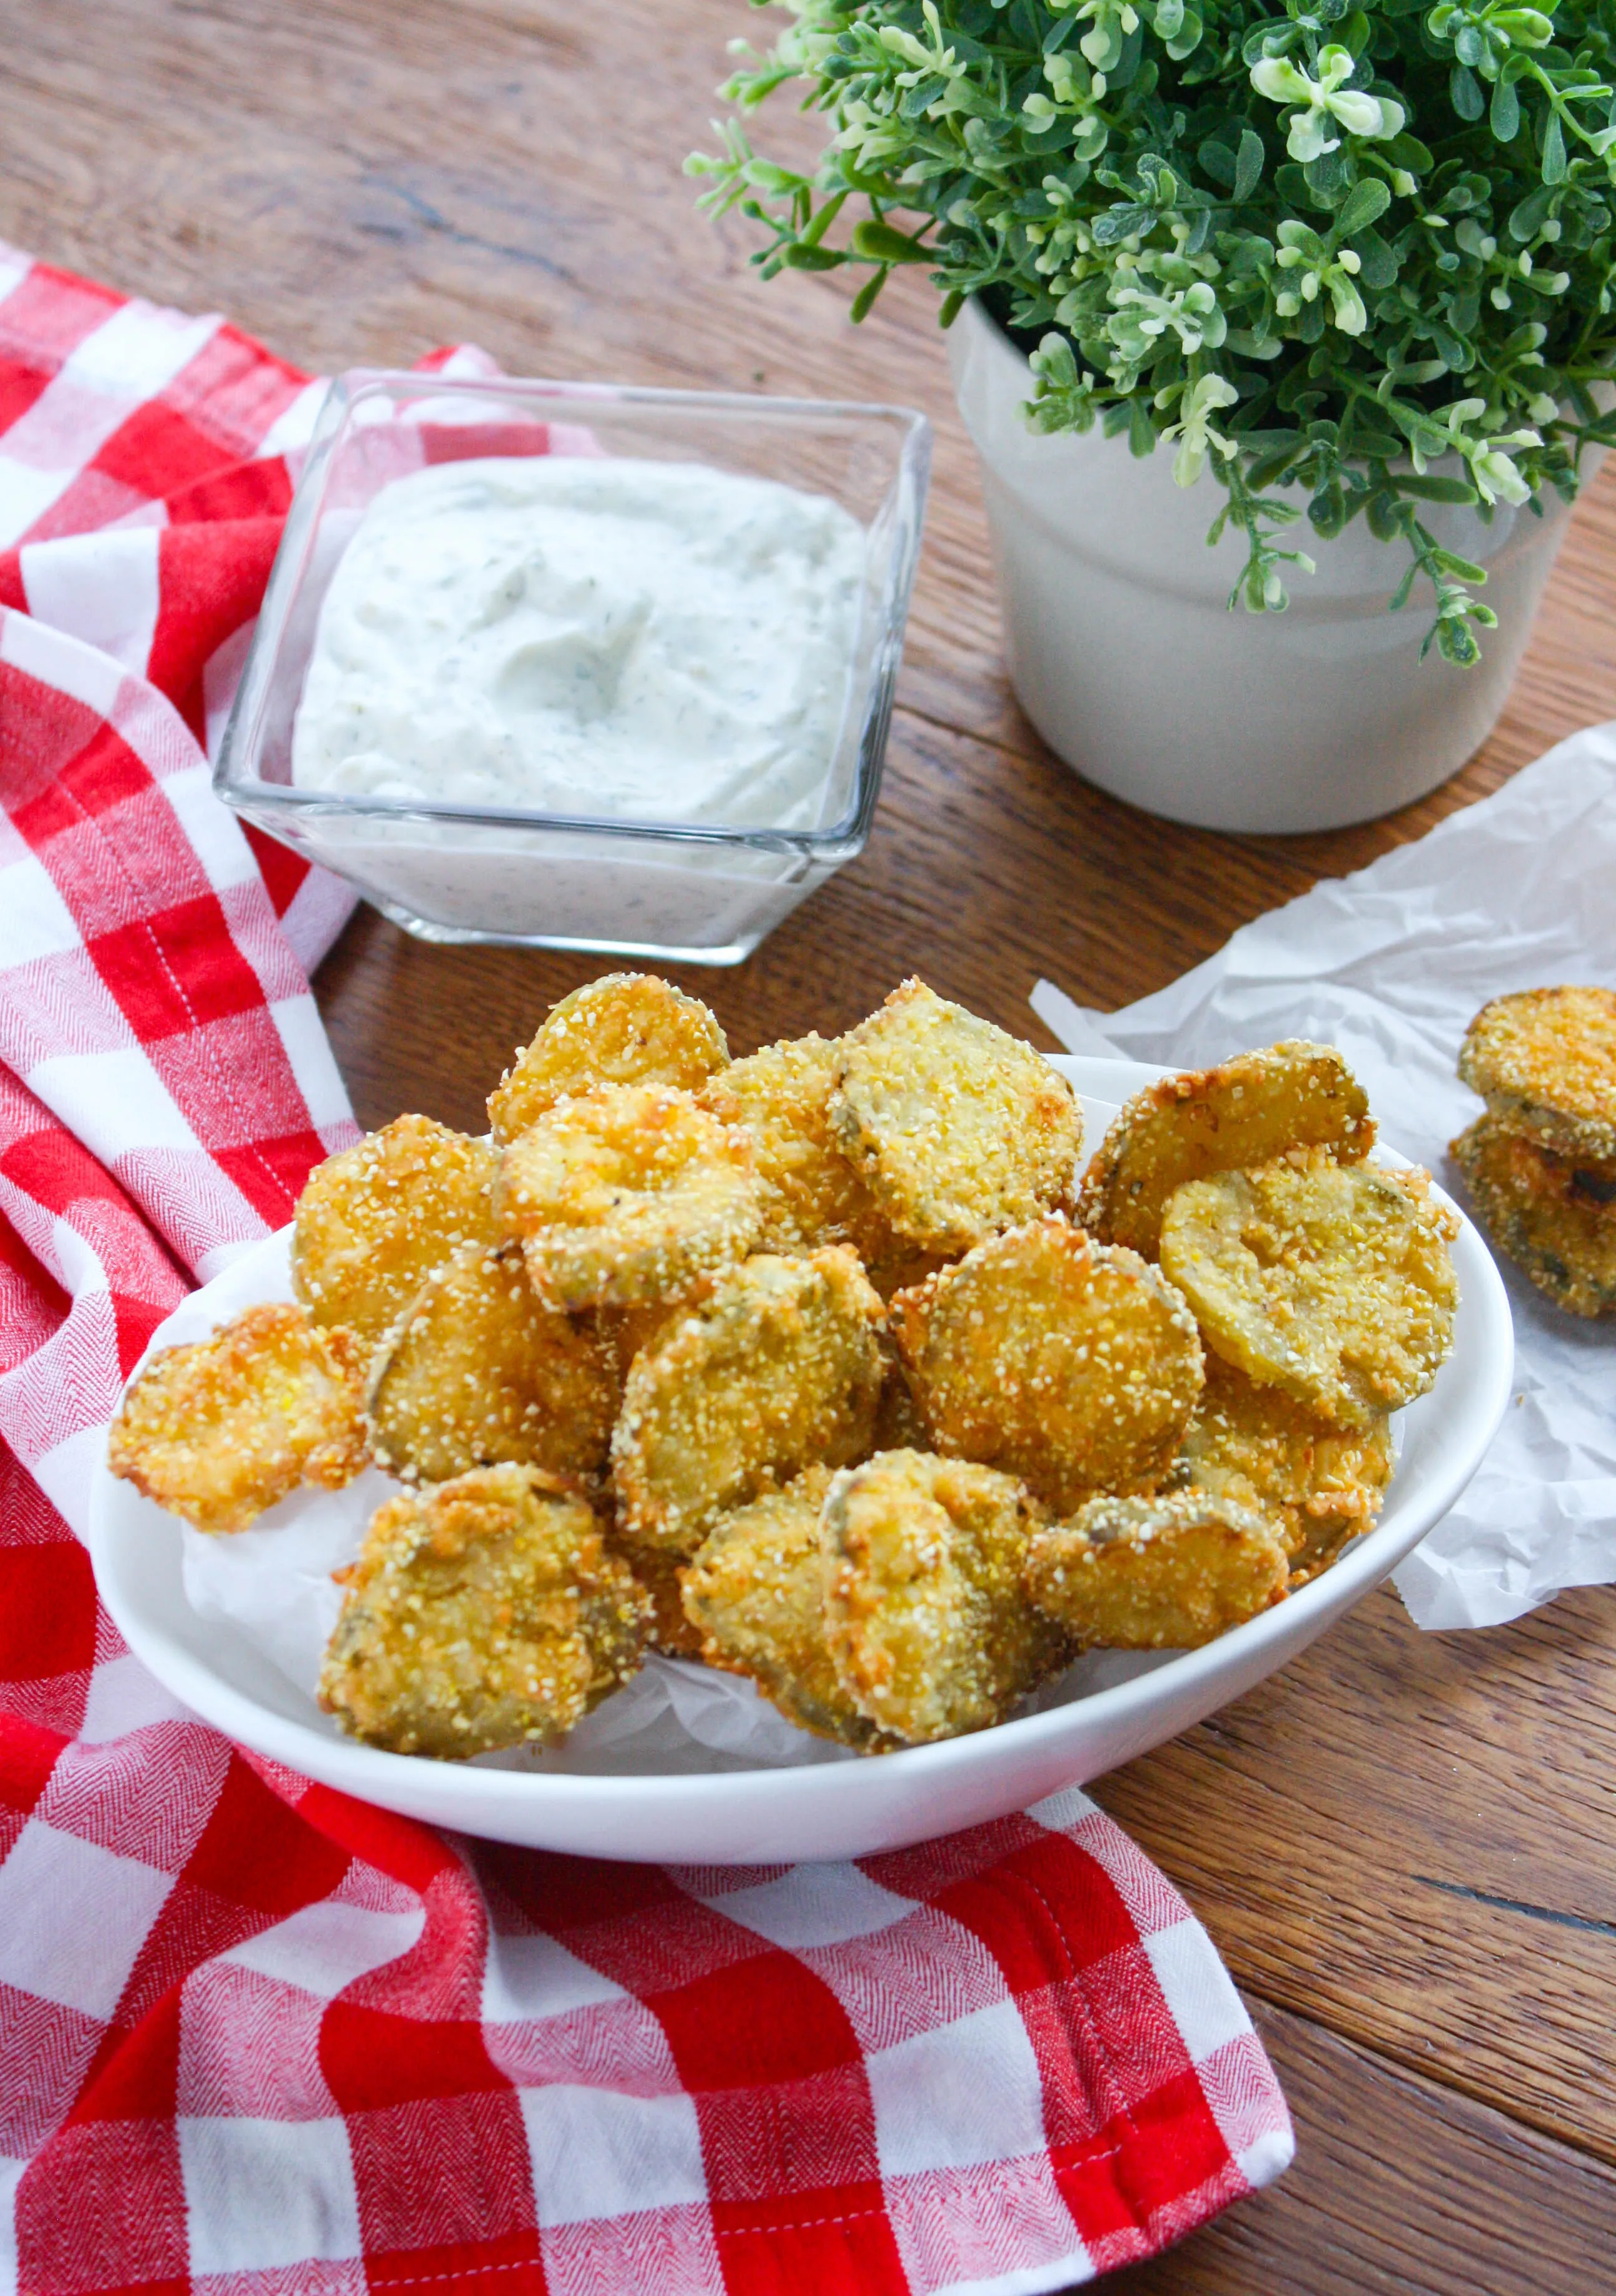 Fried Pickles with Homemade Buttermilk Ranch Dressing are the perfect snack to much on at any gathering. You'll love these pickles as a snack on the weekend!